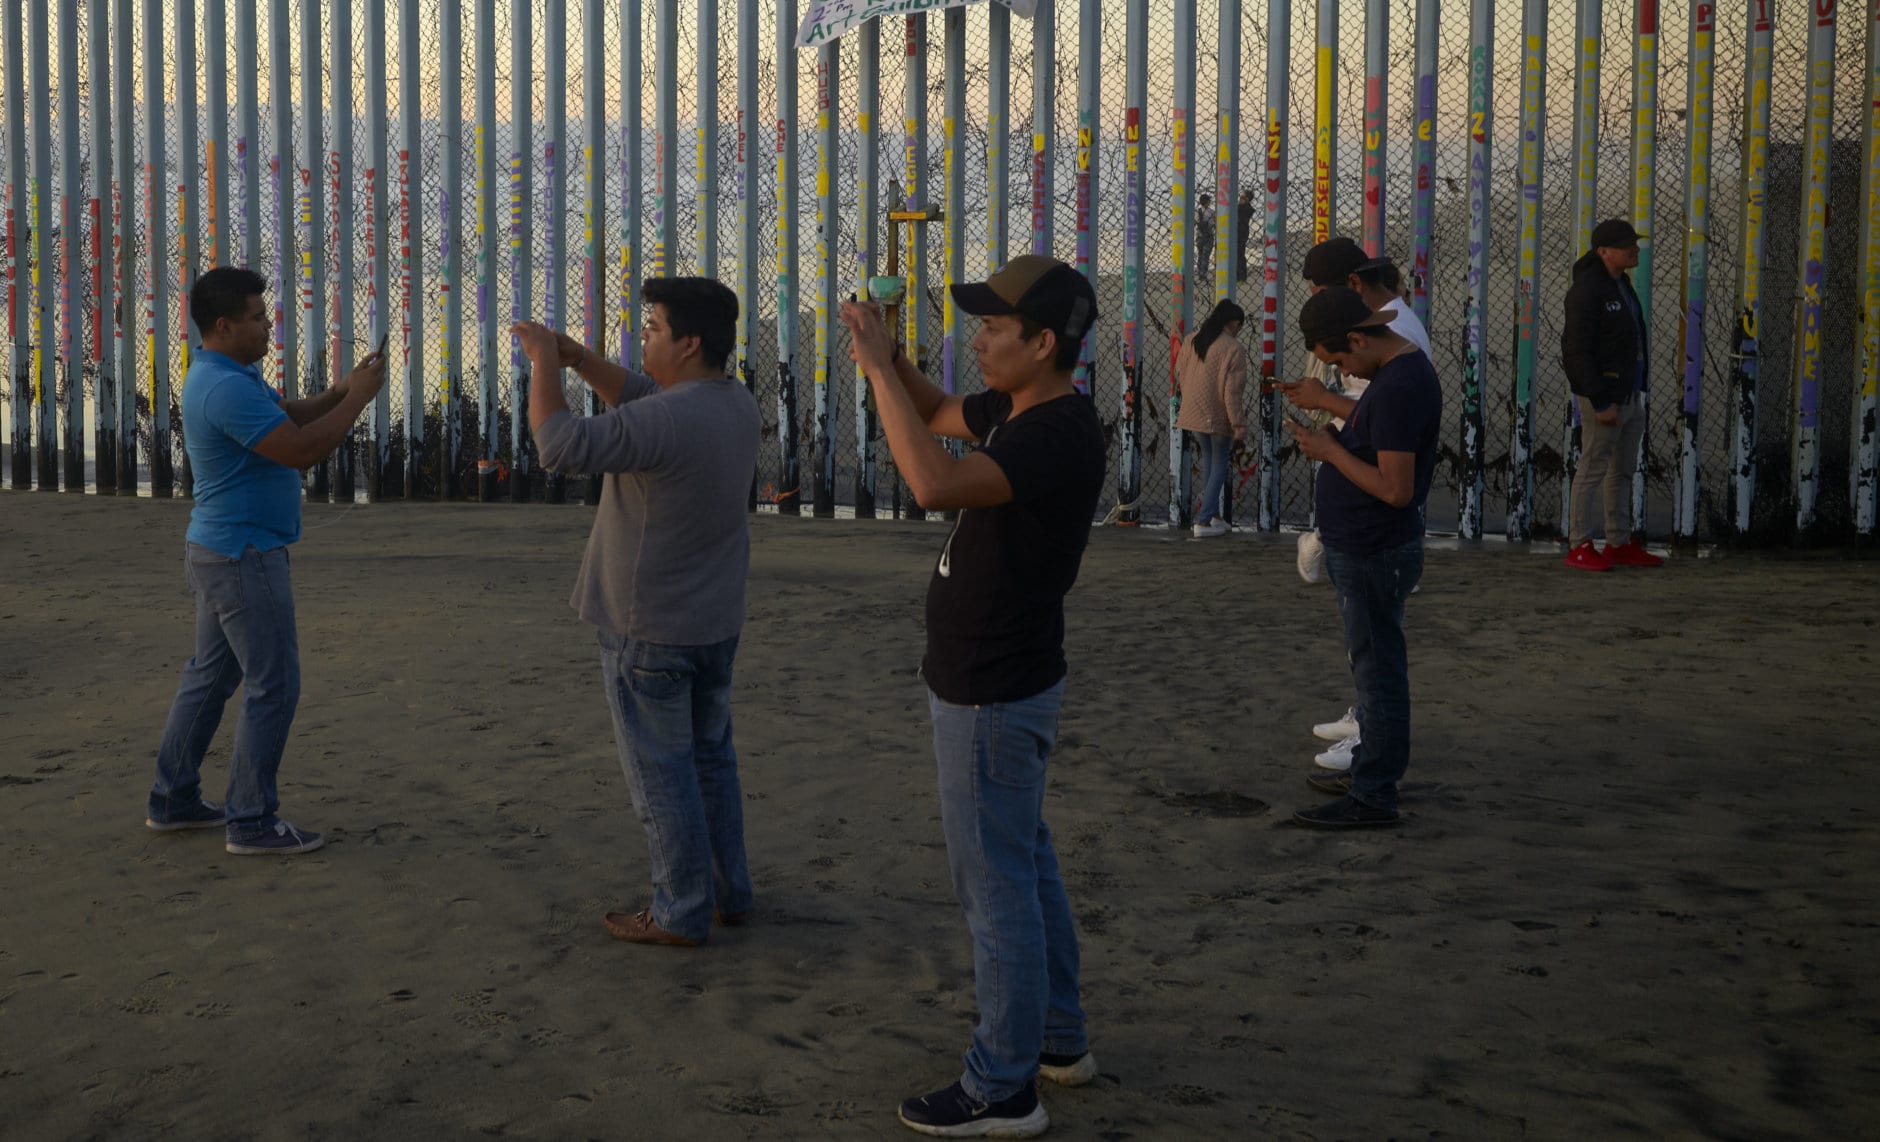 People record with their phones in front of the border wall Thursday, Jan. 10, 2019, along the beach in Tijuana, Mexico. Taking the shutdown fight to the Mexican border, U.S. President Donald Trump edged closer Thursday to declaring a national emergency in an extraordinary end run around Congress to fund his long-promised border wall. (AP Photo/Gregory Bull)